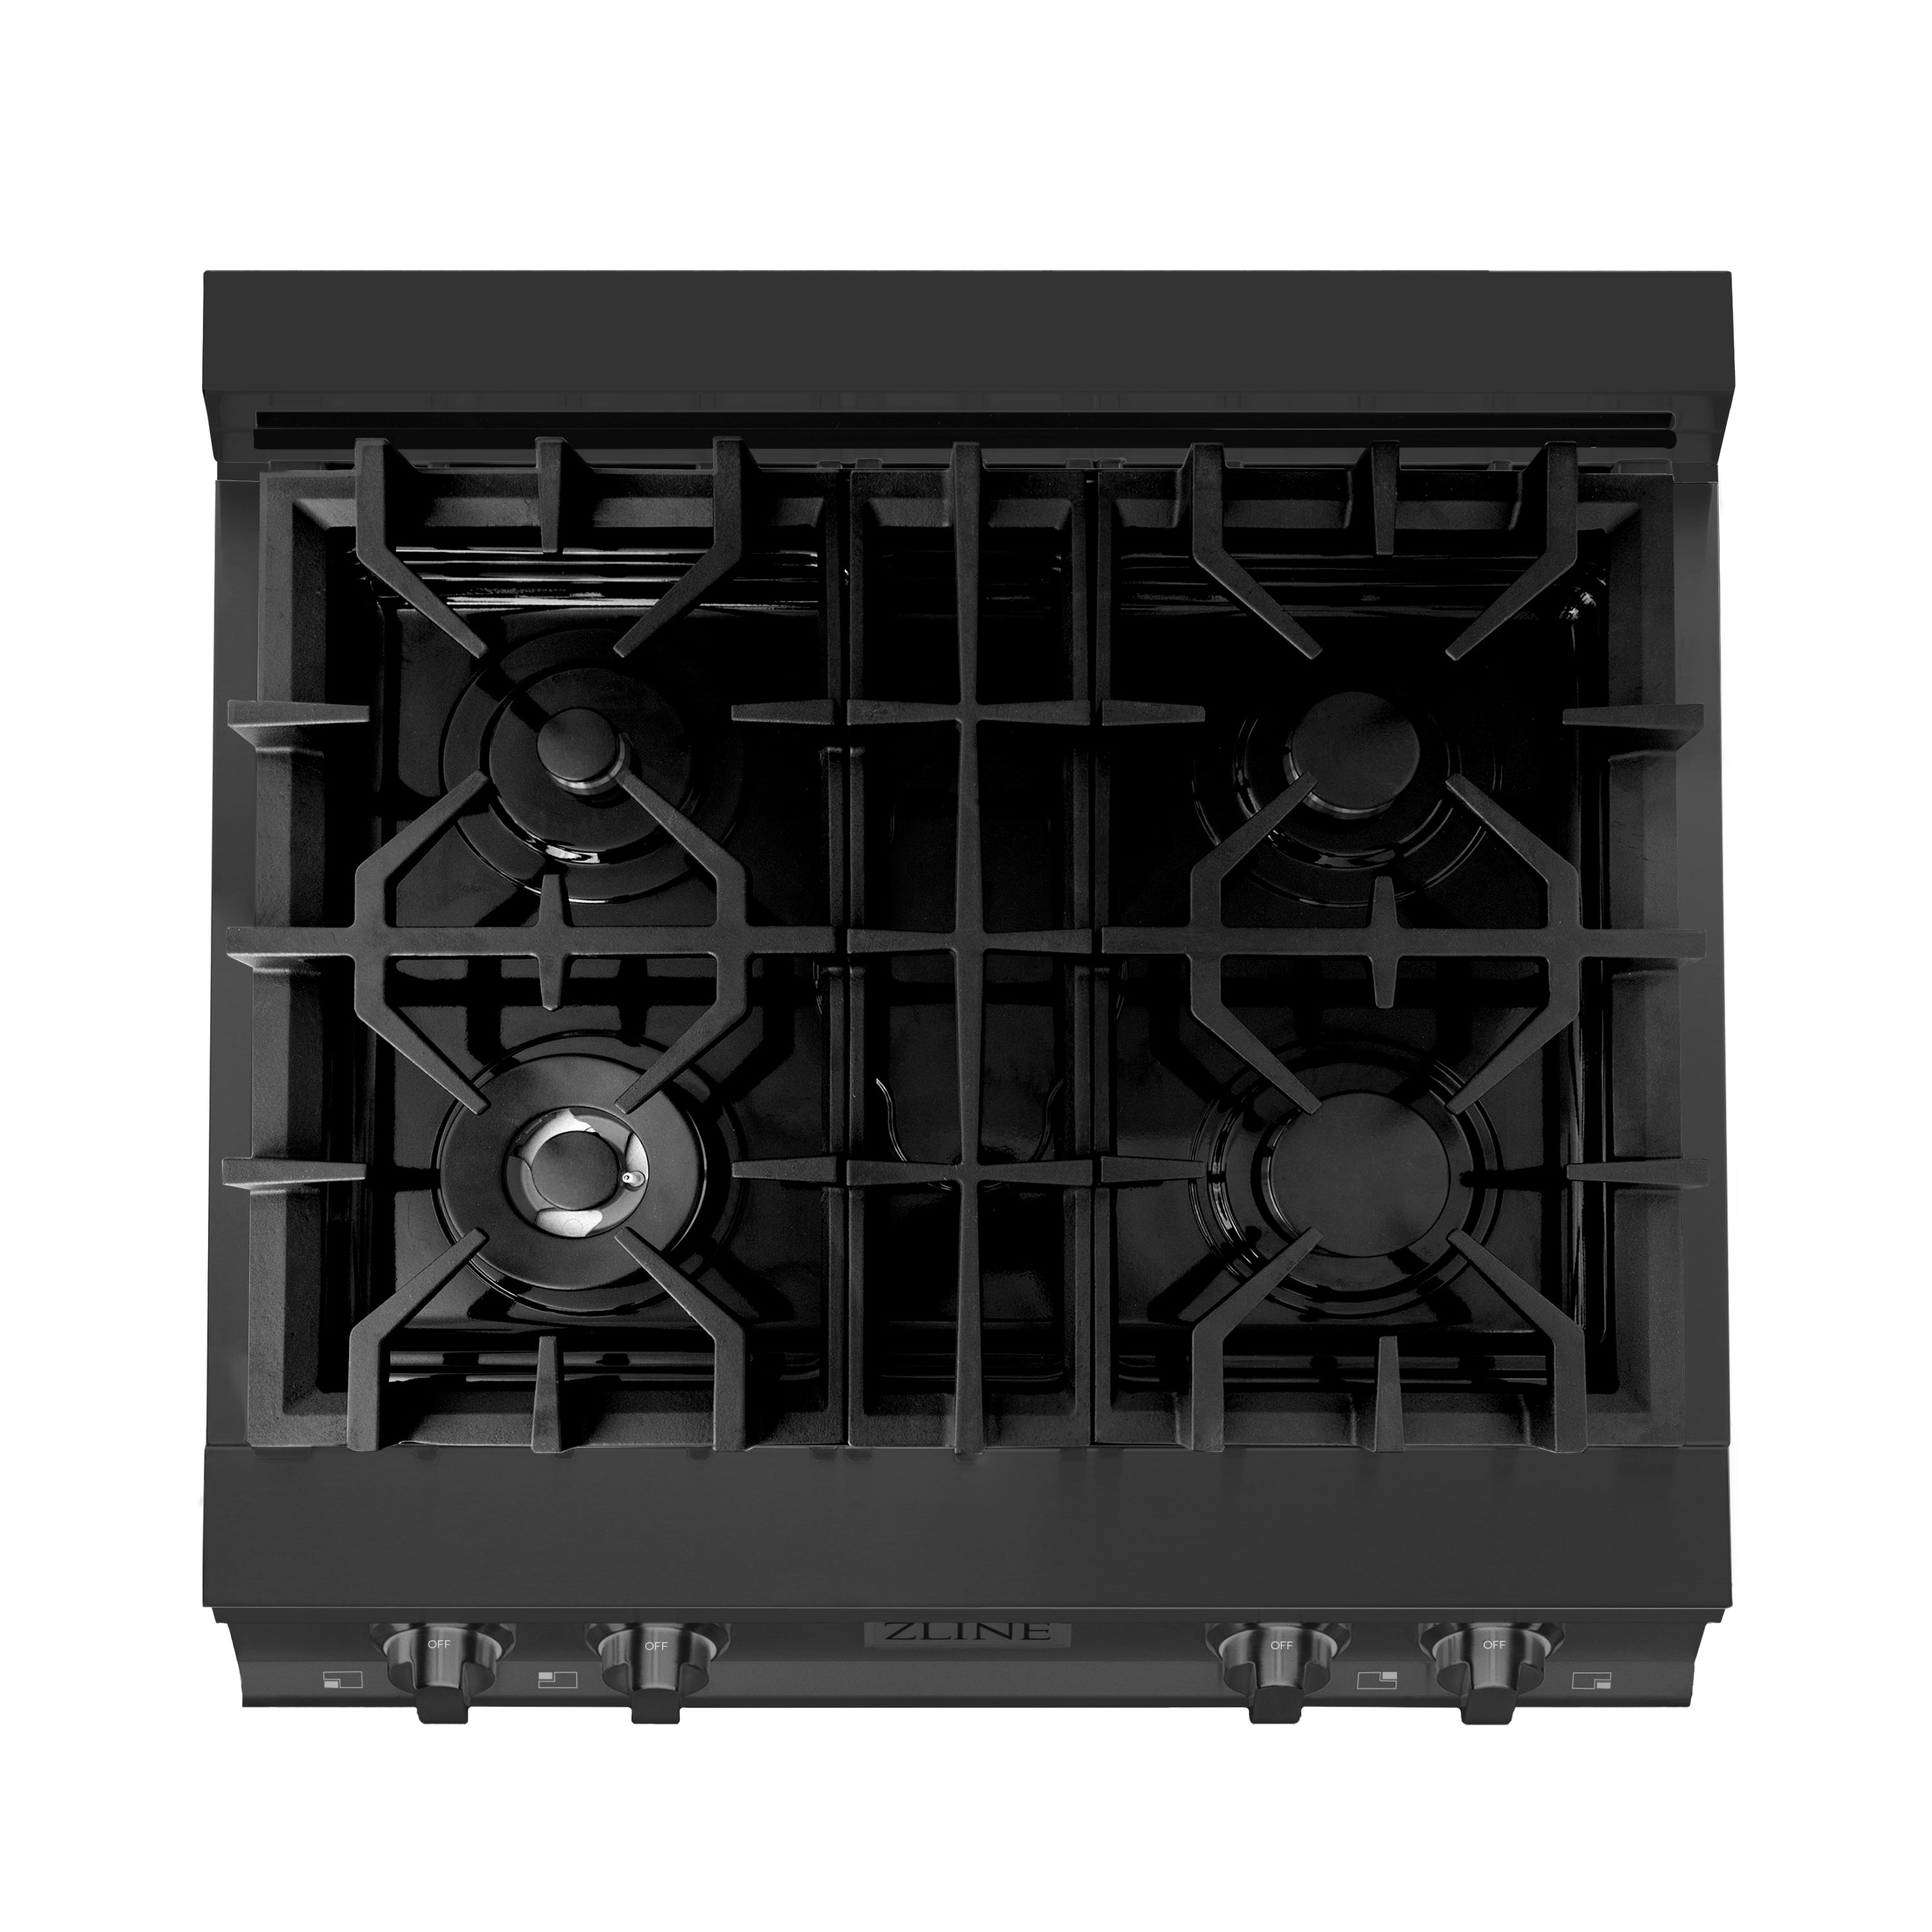 ZLINE 30" Porcelain Gas Stovetop in Black Stainless with 4 Gas Burners (RTB-30)